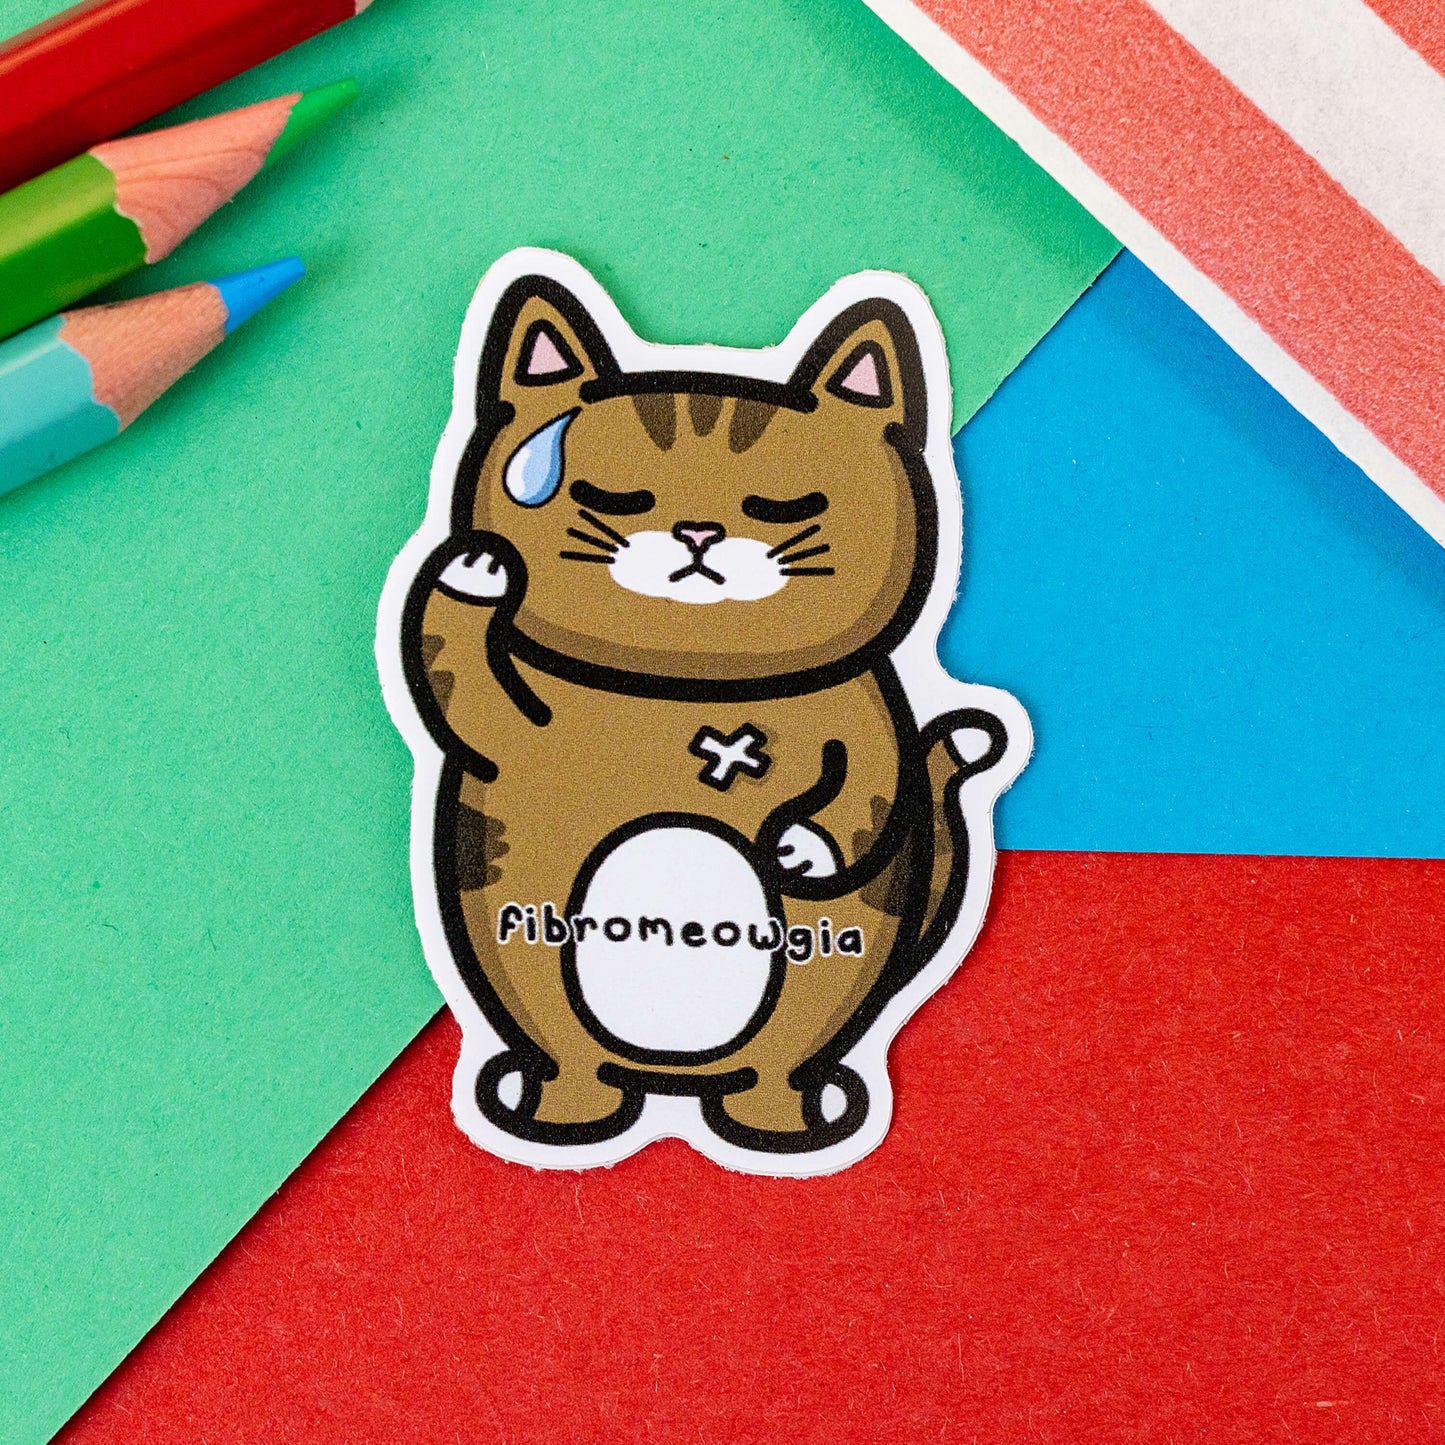 The Fibromeowgia Cat Sticker - Fibromyalgia Syndrome on a red, blue and green background with colouring pencils and a red stripe candy bag. The brown sad tabby cat shaped sticker has one paw on its head and the other on its tummy with a white bandaid and sweat droplet, across its middle reads 'fibromeowgia'. The hand drawn design is raising awareness for fibro fibromyalgia syndrome.